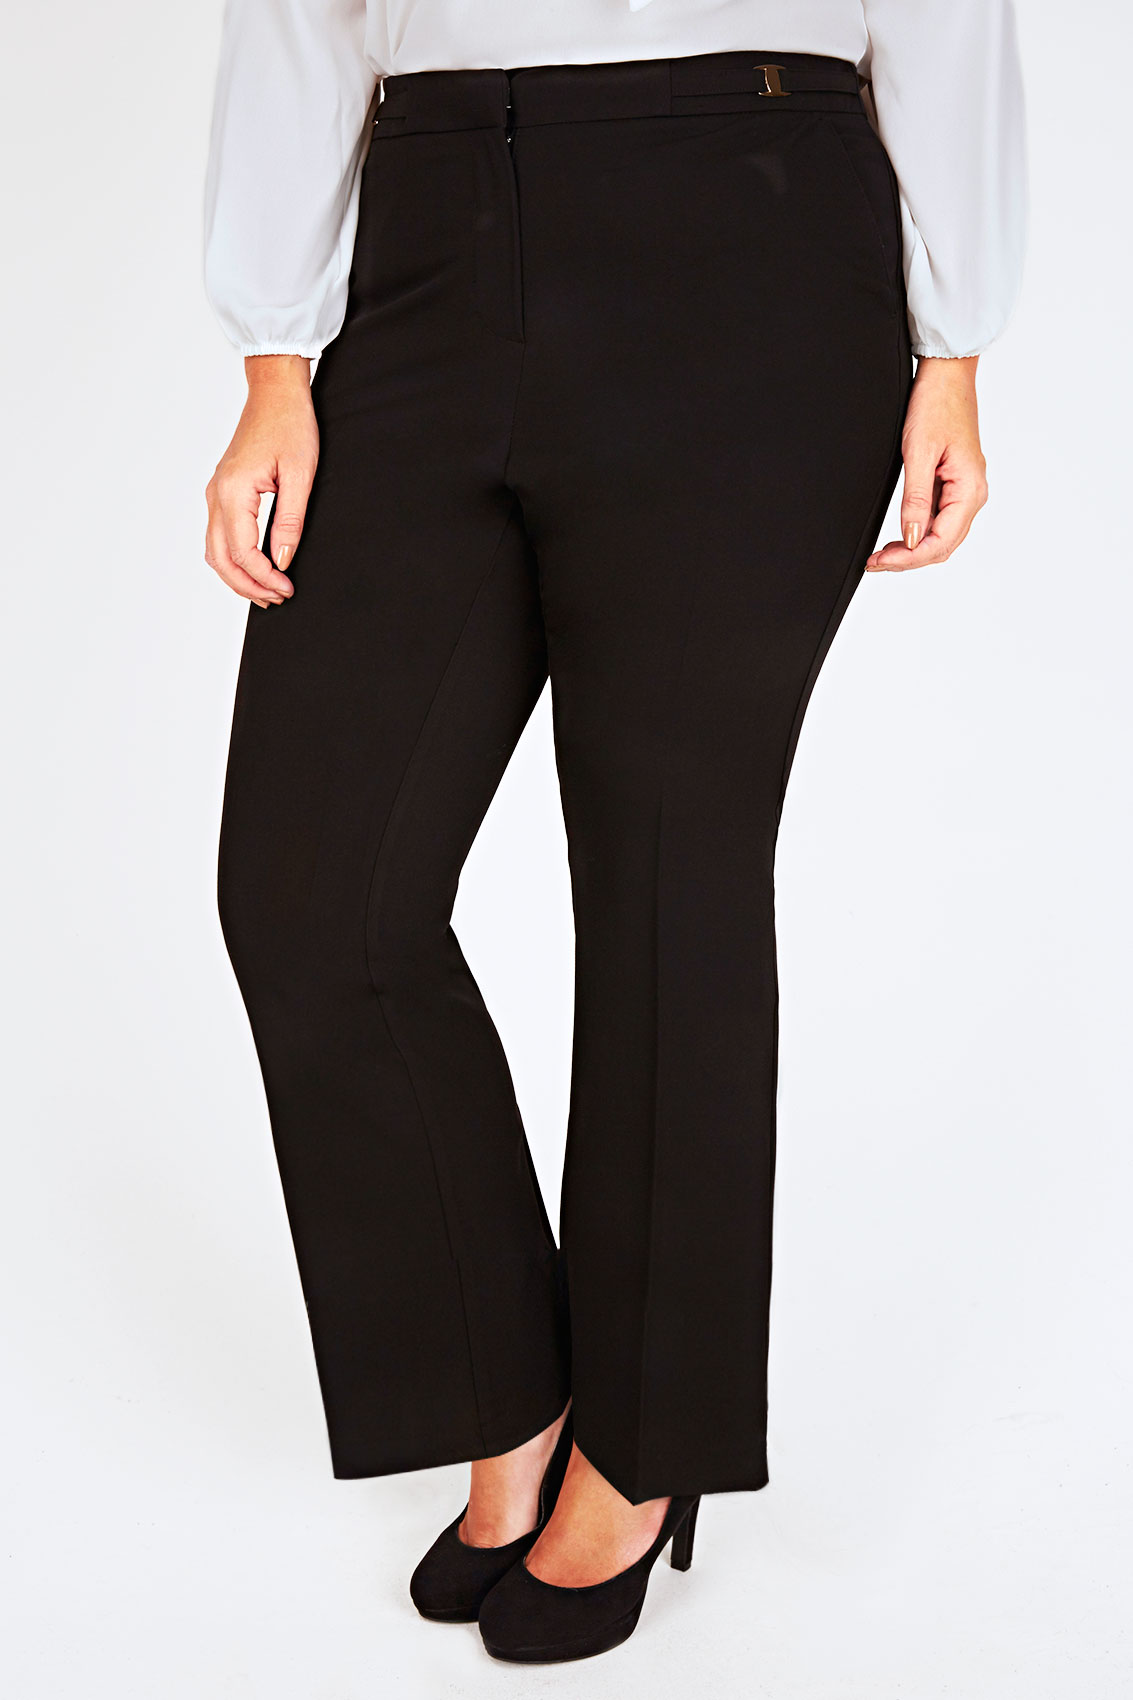 Black Boot Cut Trouser With Gold Trim Plus Size 16 to 32